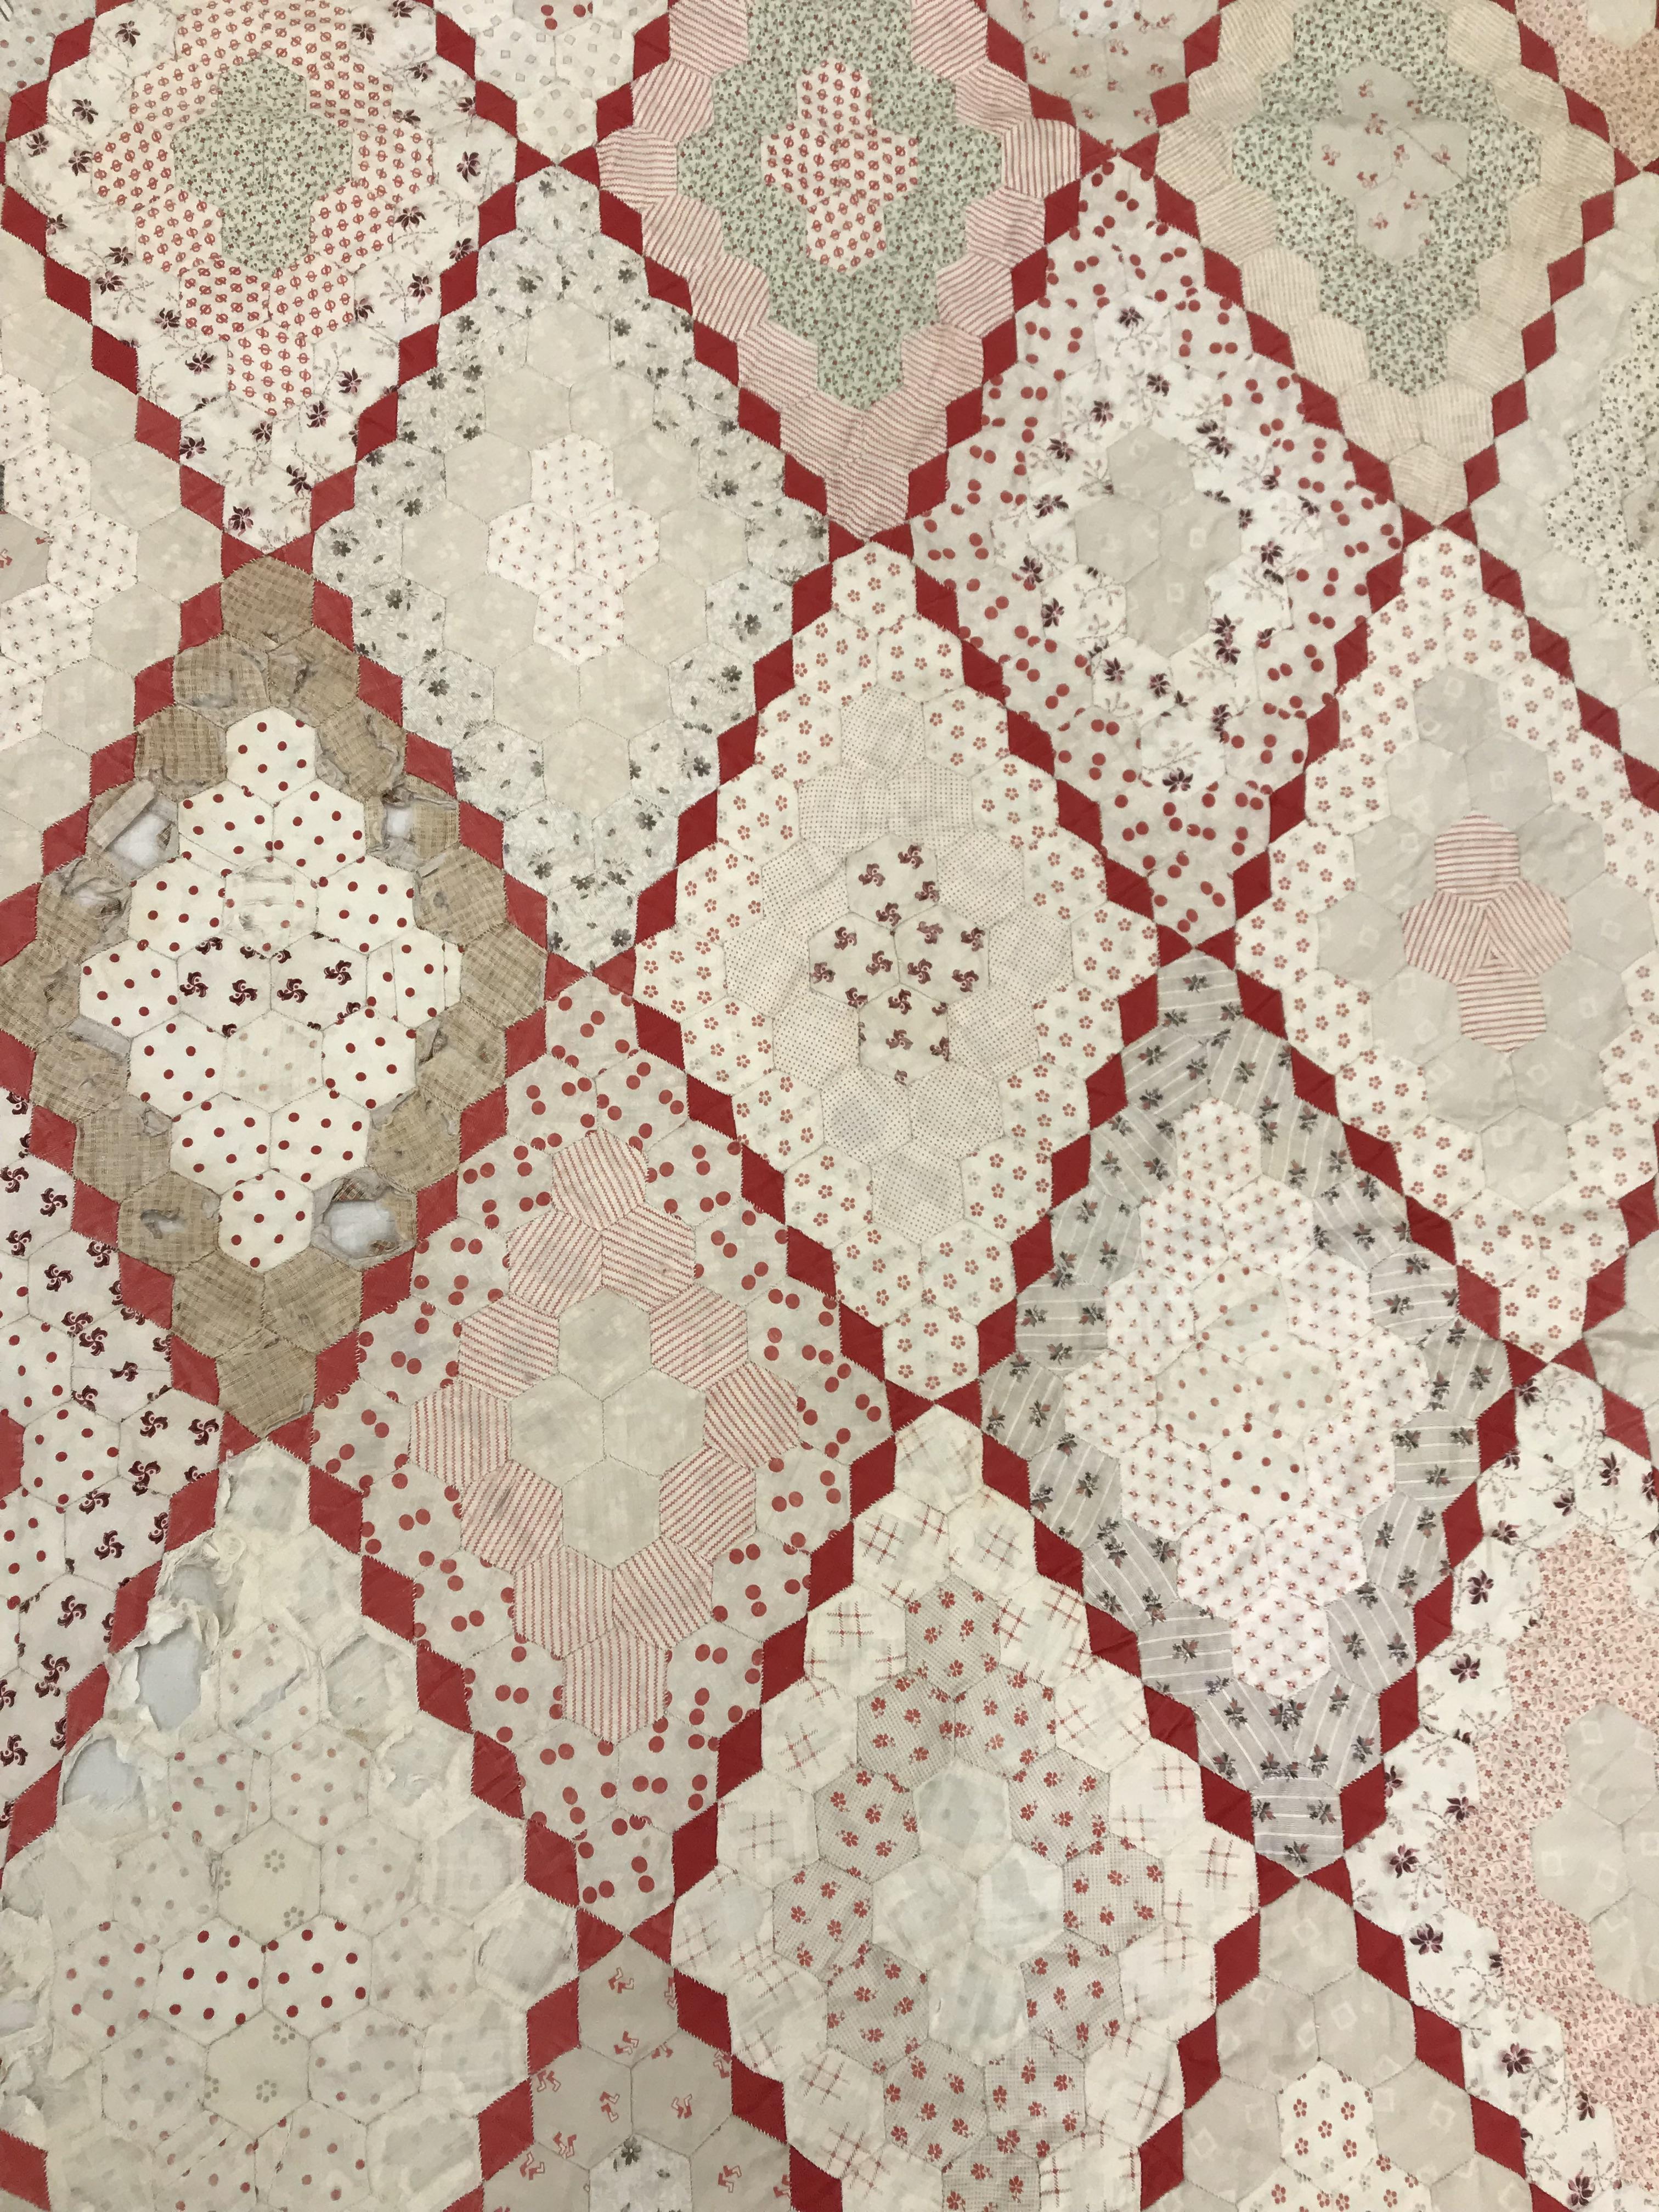 An early 20th Century hand-stitched, pieced quilt, backed with plain fabric and no wadding, - Image 12 of 36